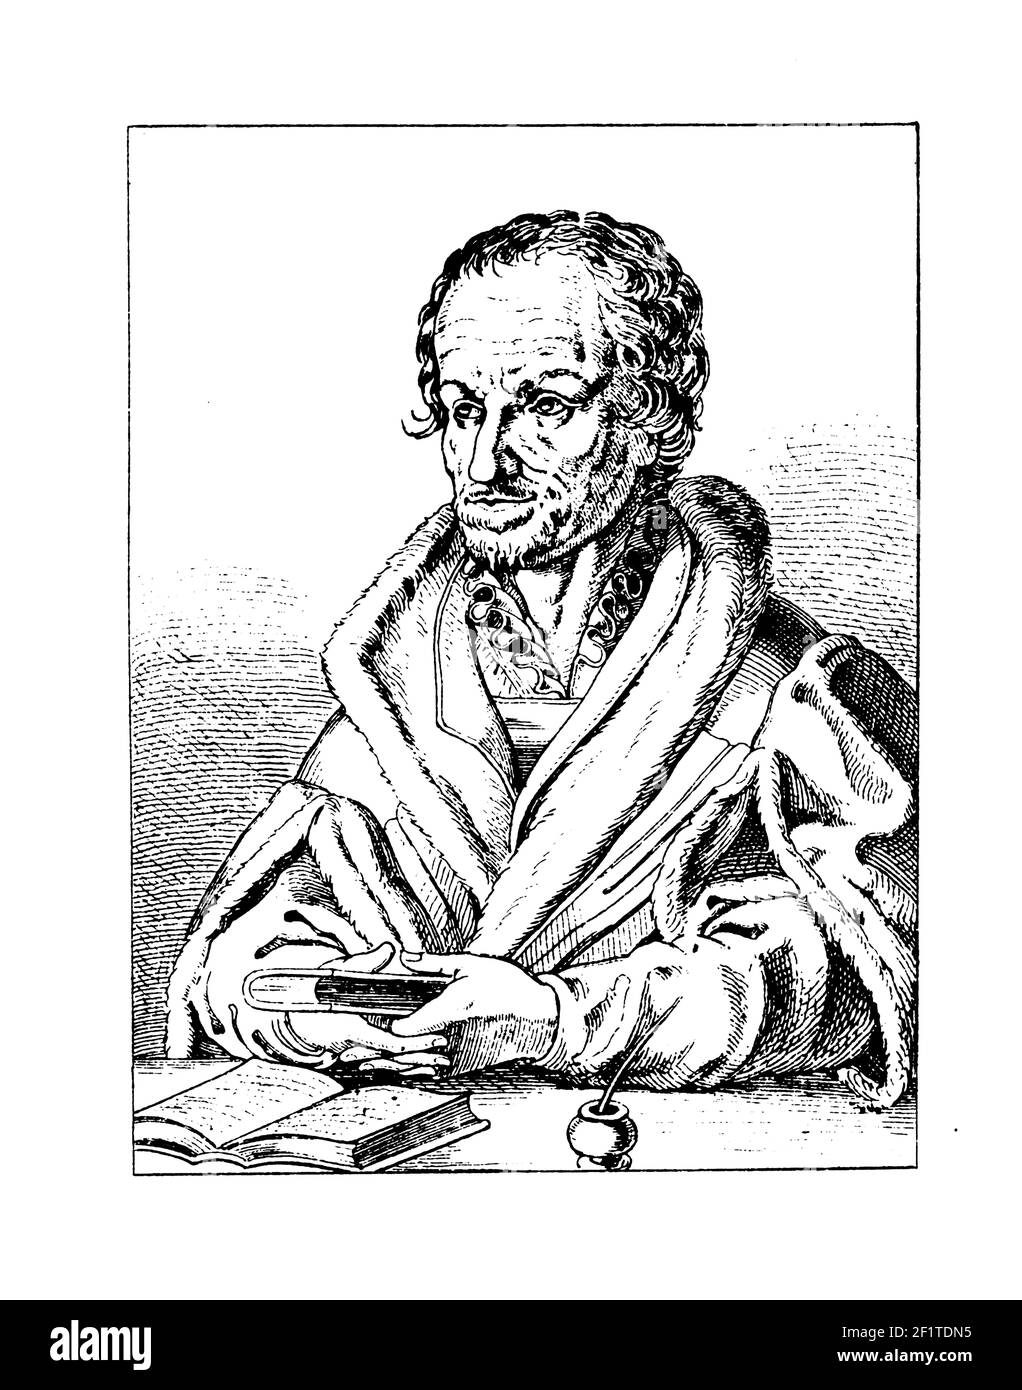 Antique 19th-century engraving of a portrait of Philipp Melanchthon, German pastor, scholar and theologian. He was born on February 16, 1497 in Brette Stock Photo